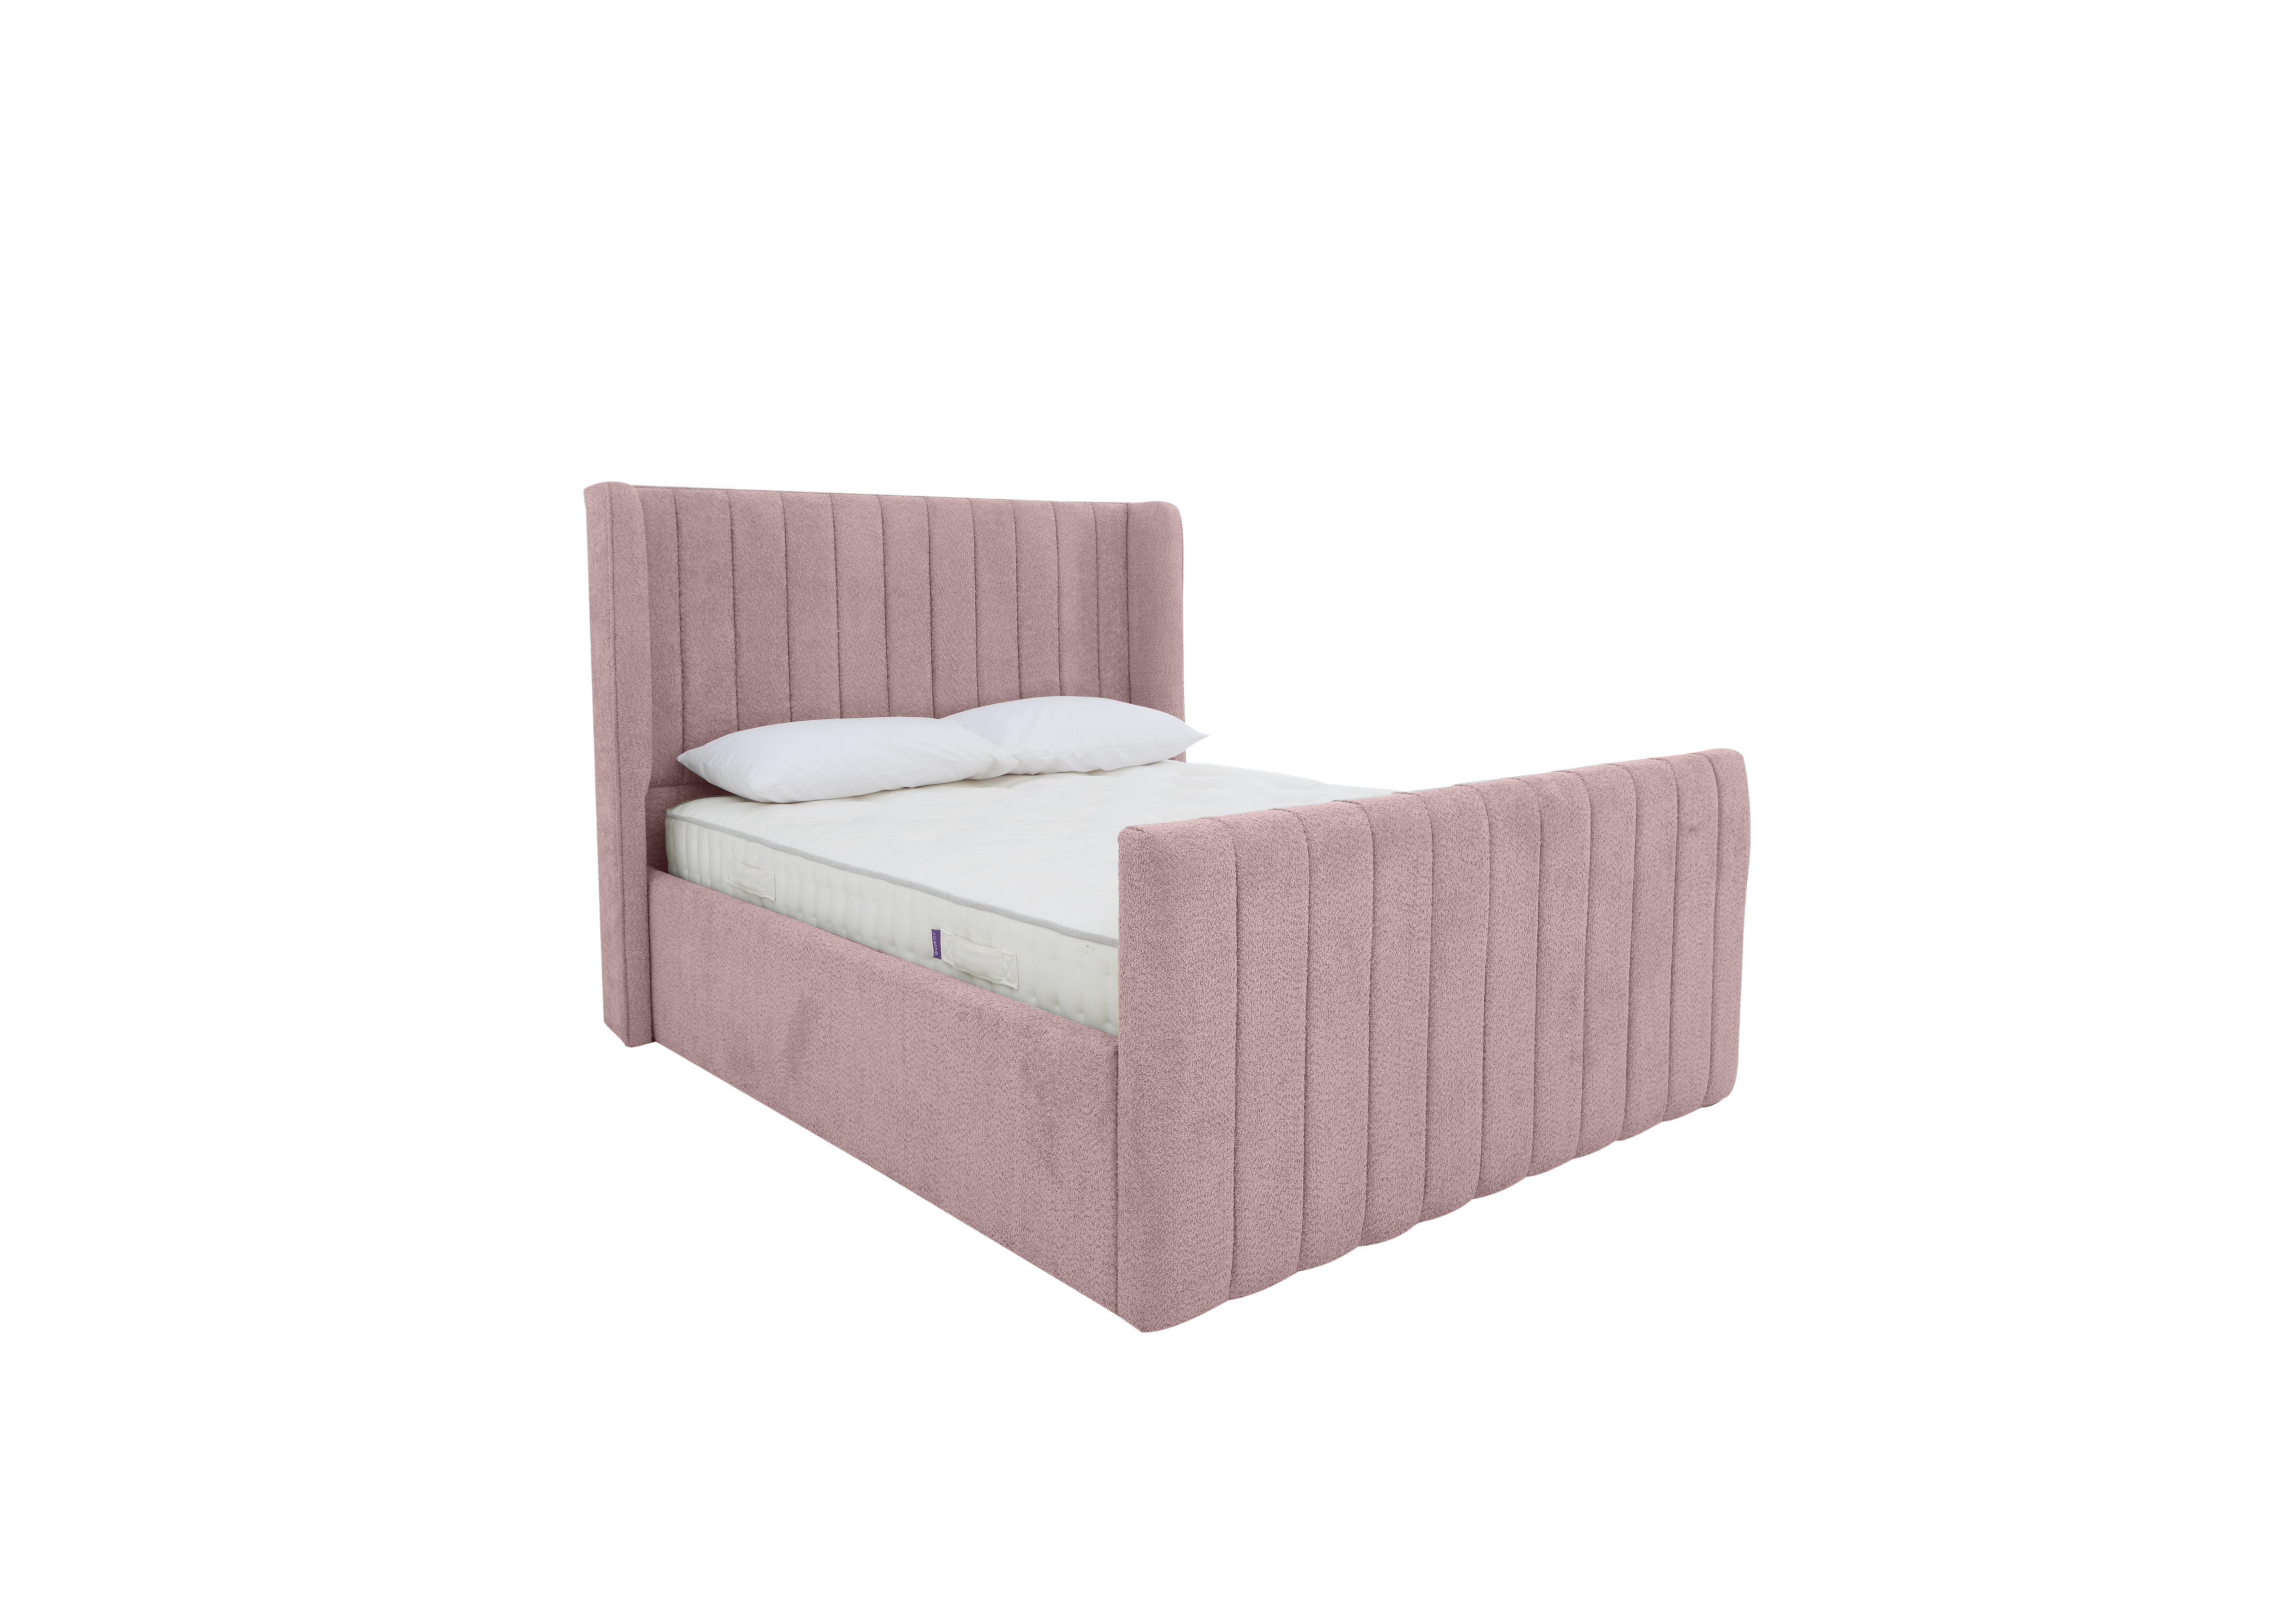 Eira High Foot End Ottoman Bed Frame in Comfy Blush on Furniture Village